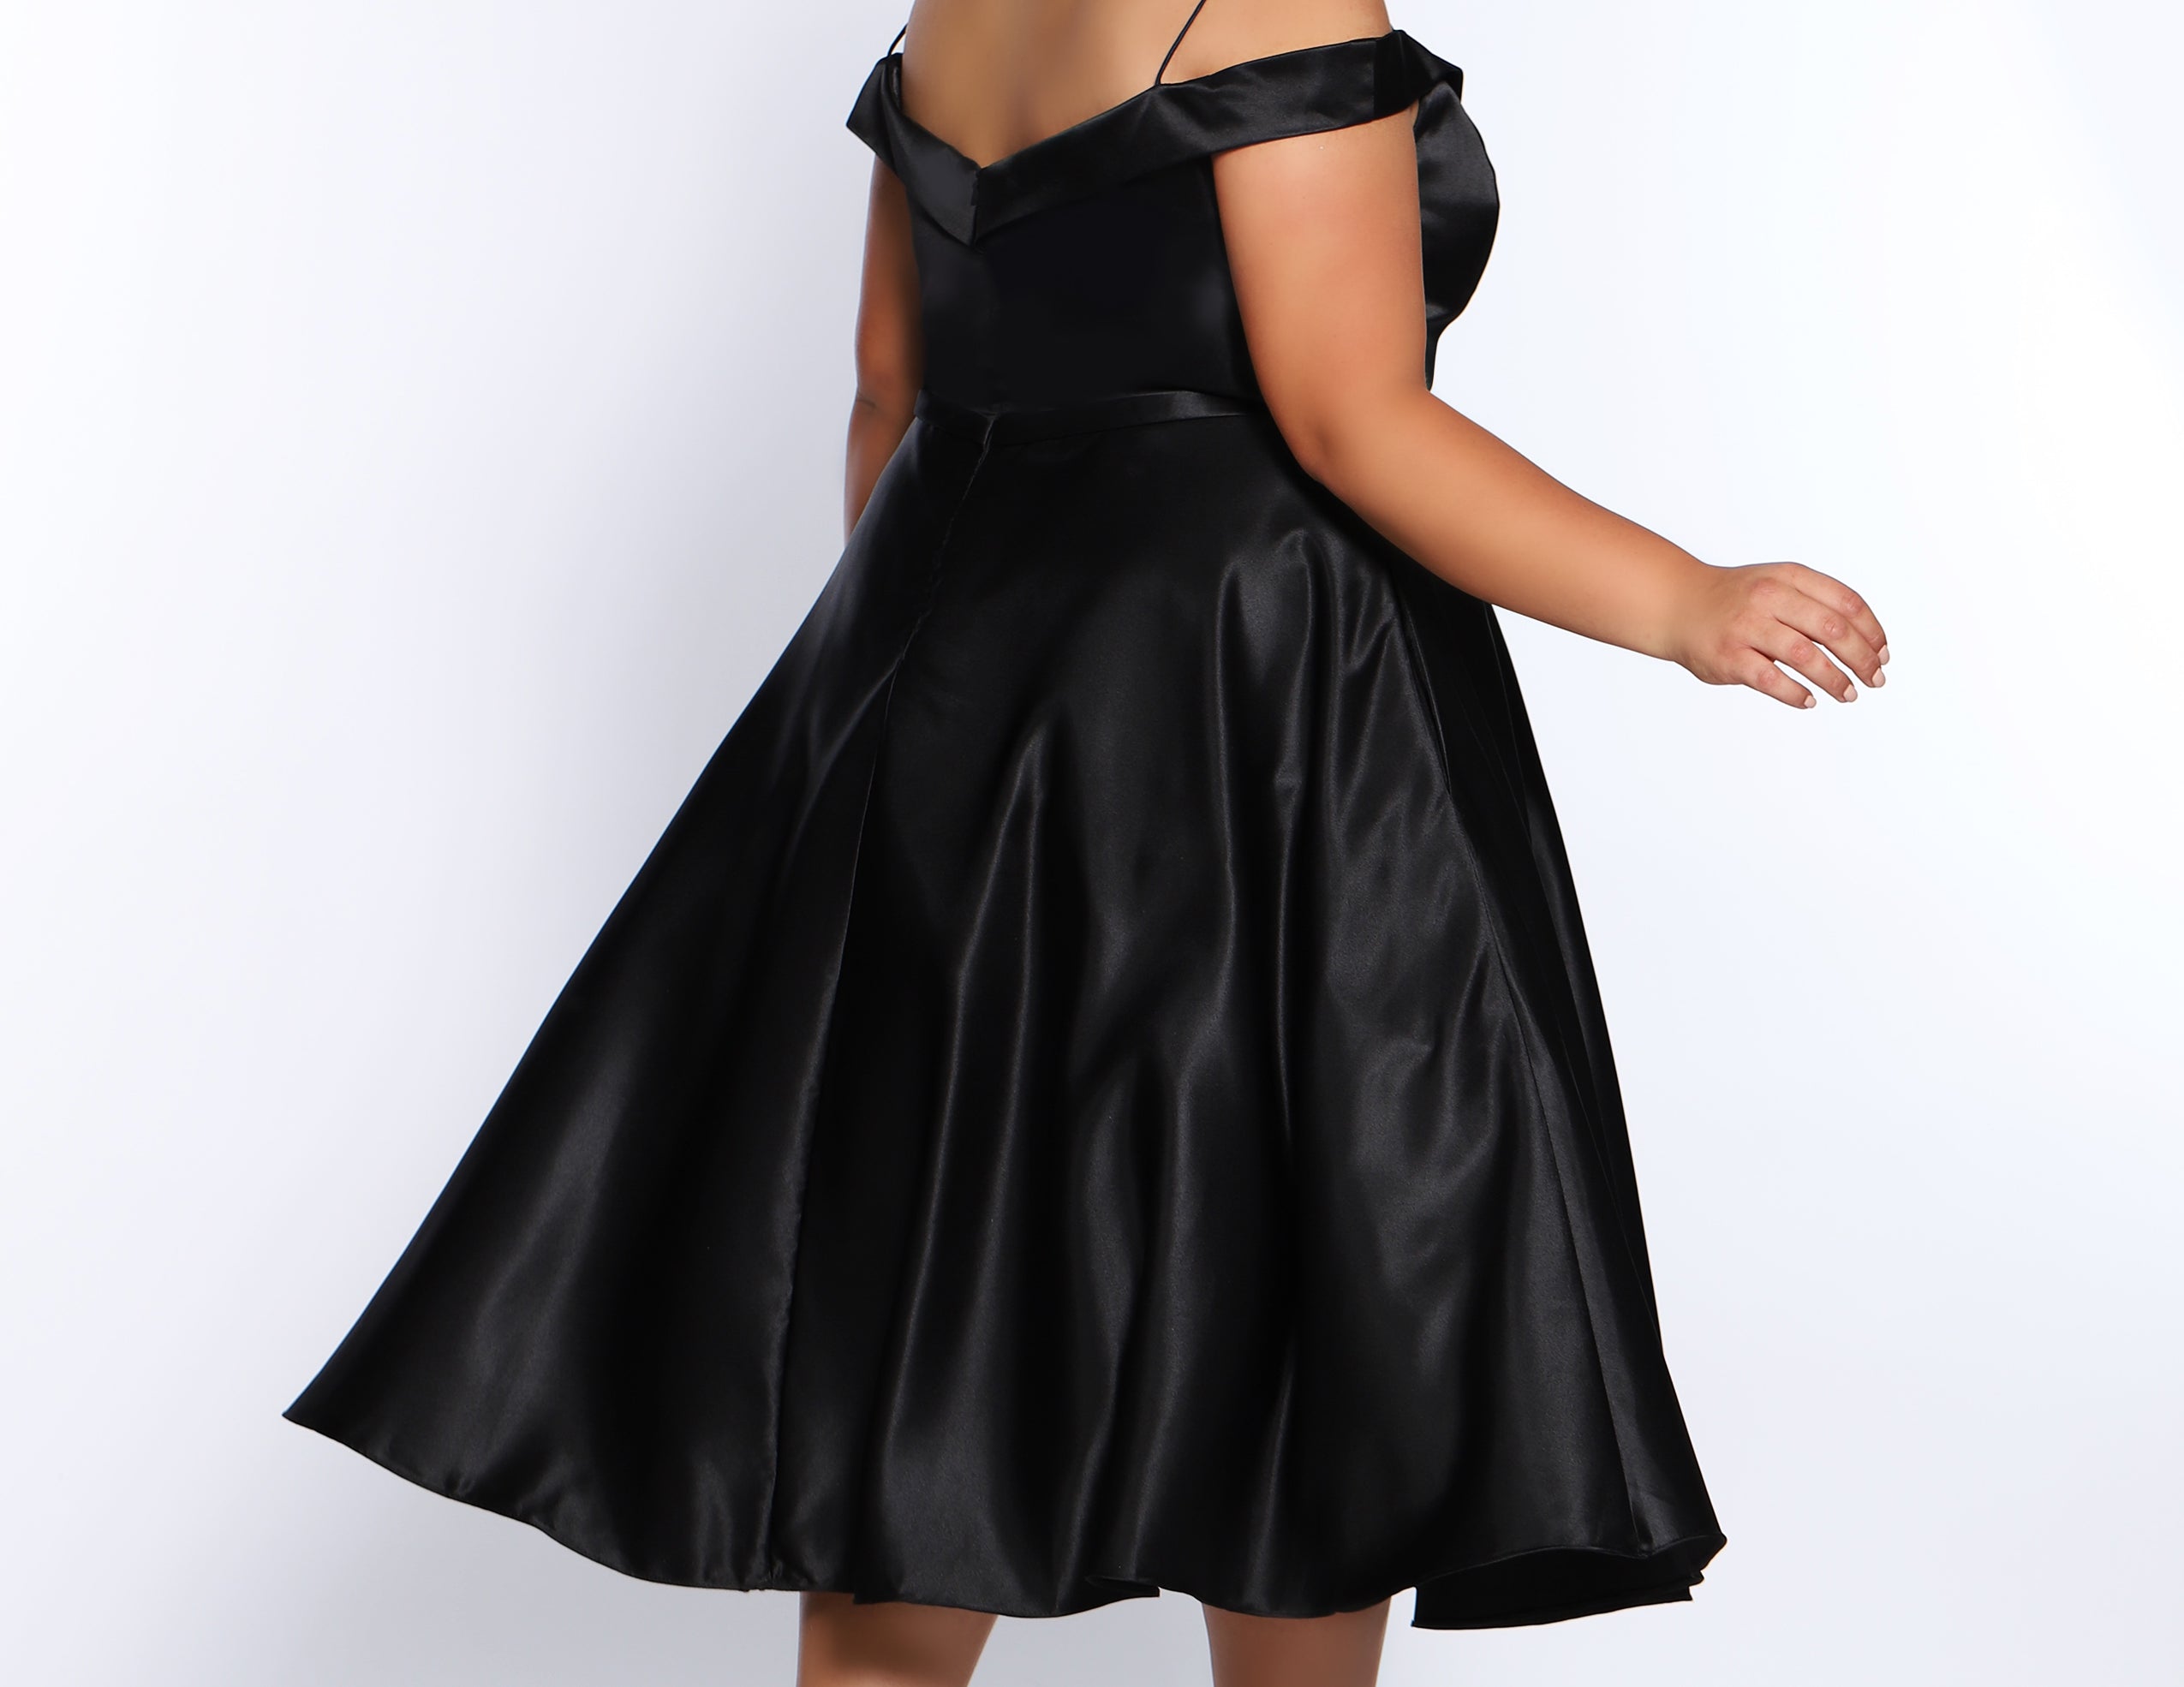 CE2011 plus size little black dress by Sydney's Closet sizes 14-32 all satin, pockets, off-the-shoulder straps, perfect for holiday parties, homecoming, new years and bridesmaid